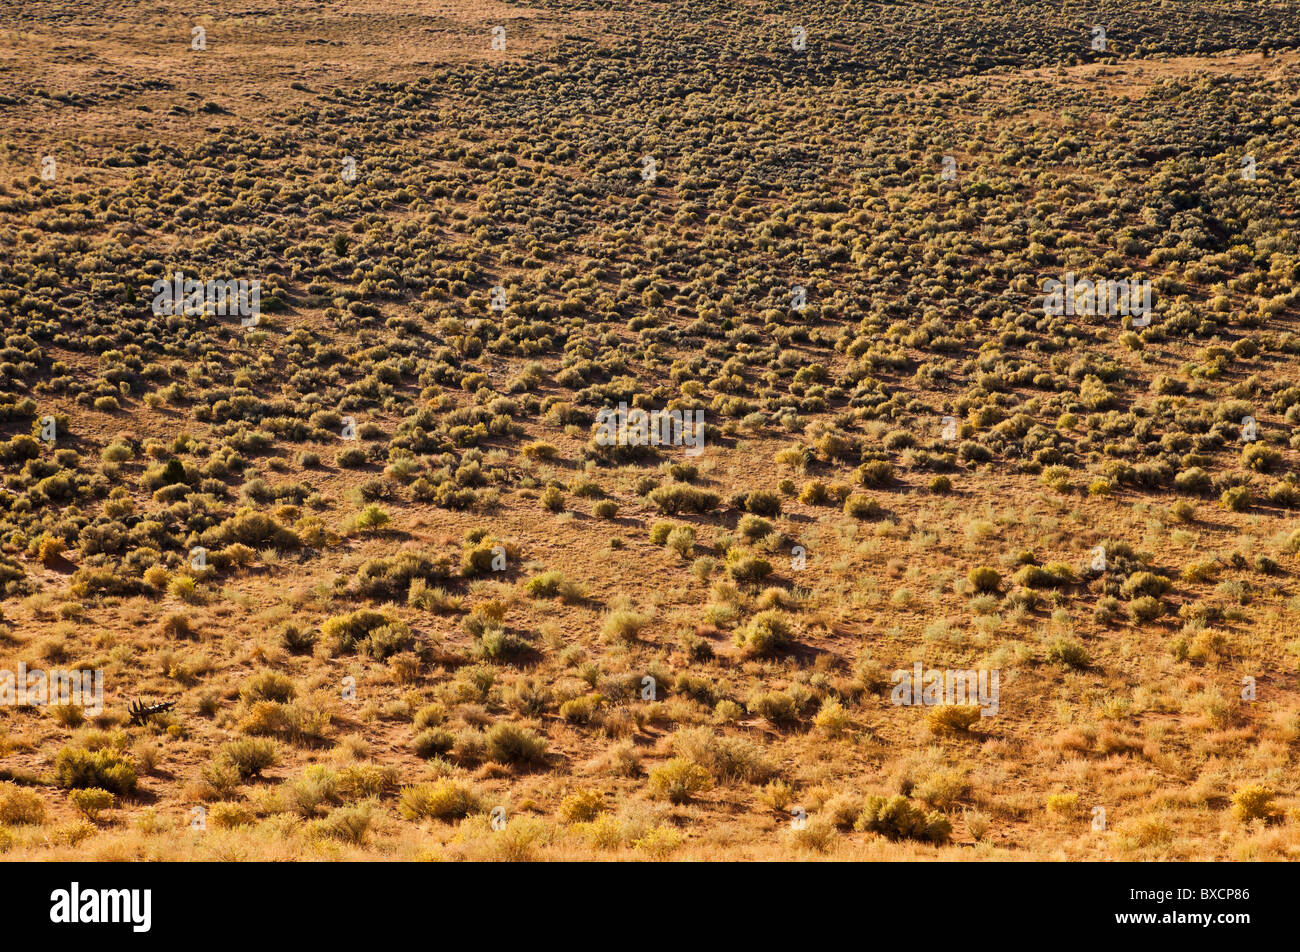 Land in Southwest Utah covered by Rabbitbrush and Sagebrush in early morning light. Stock Photo